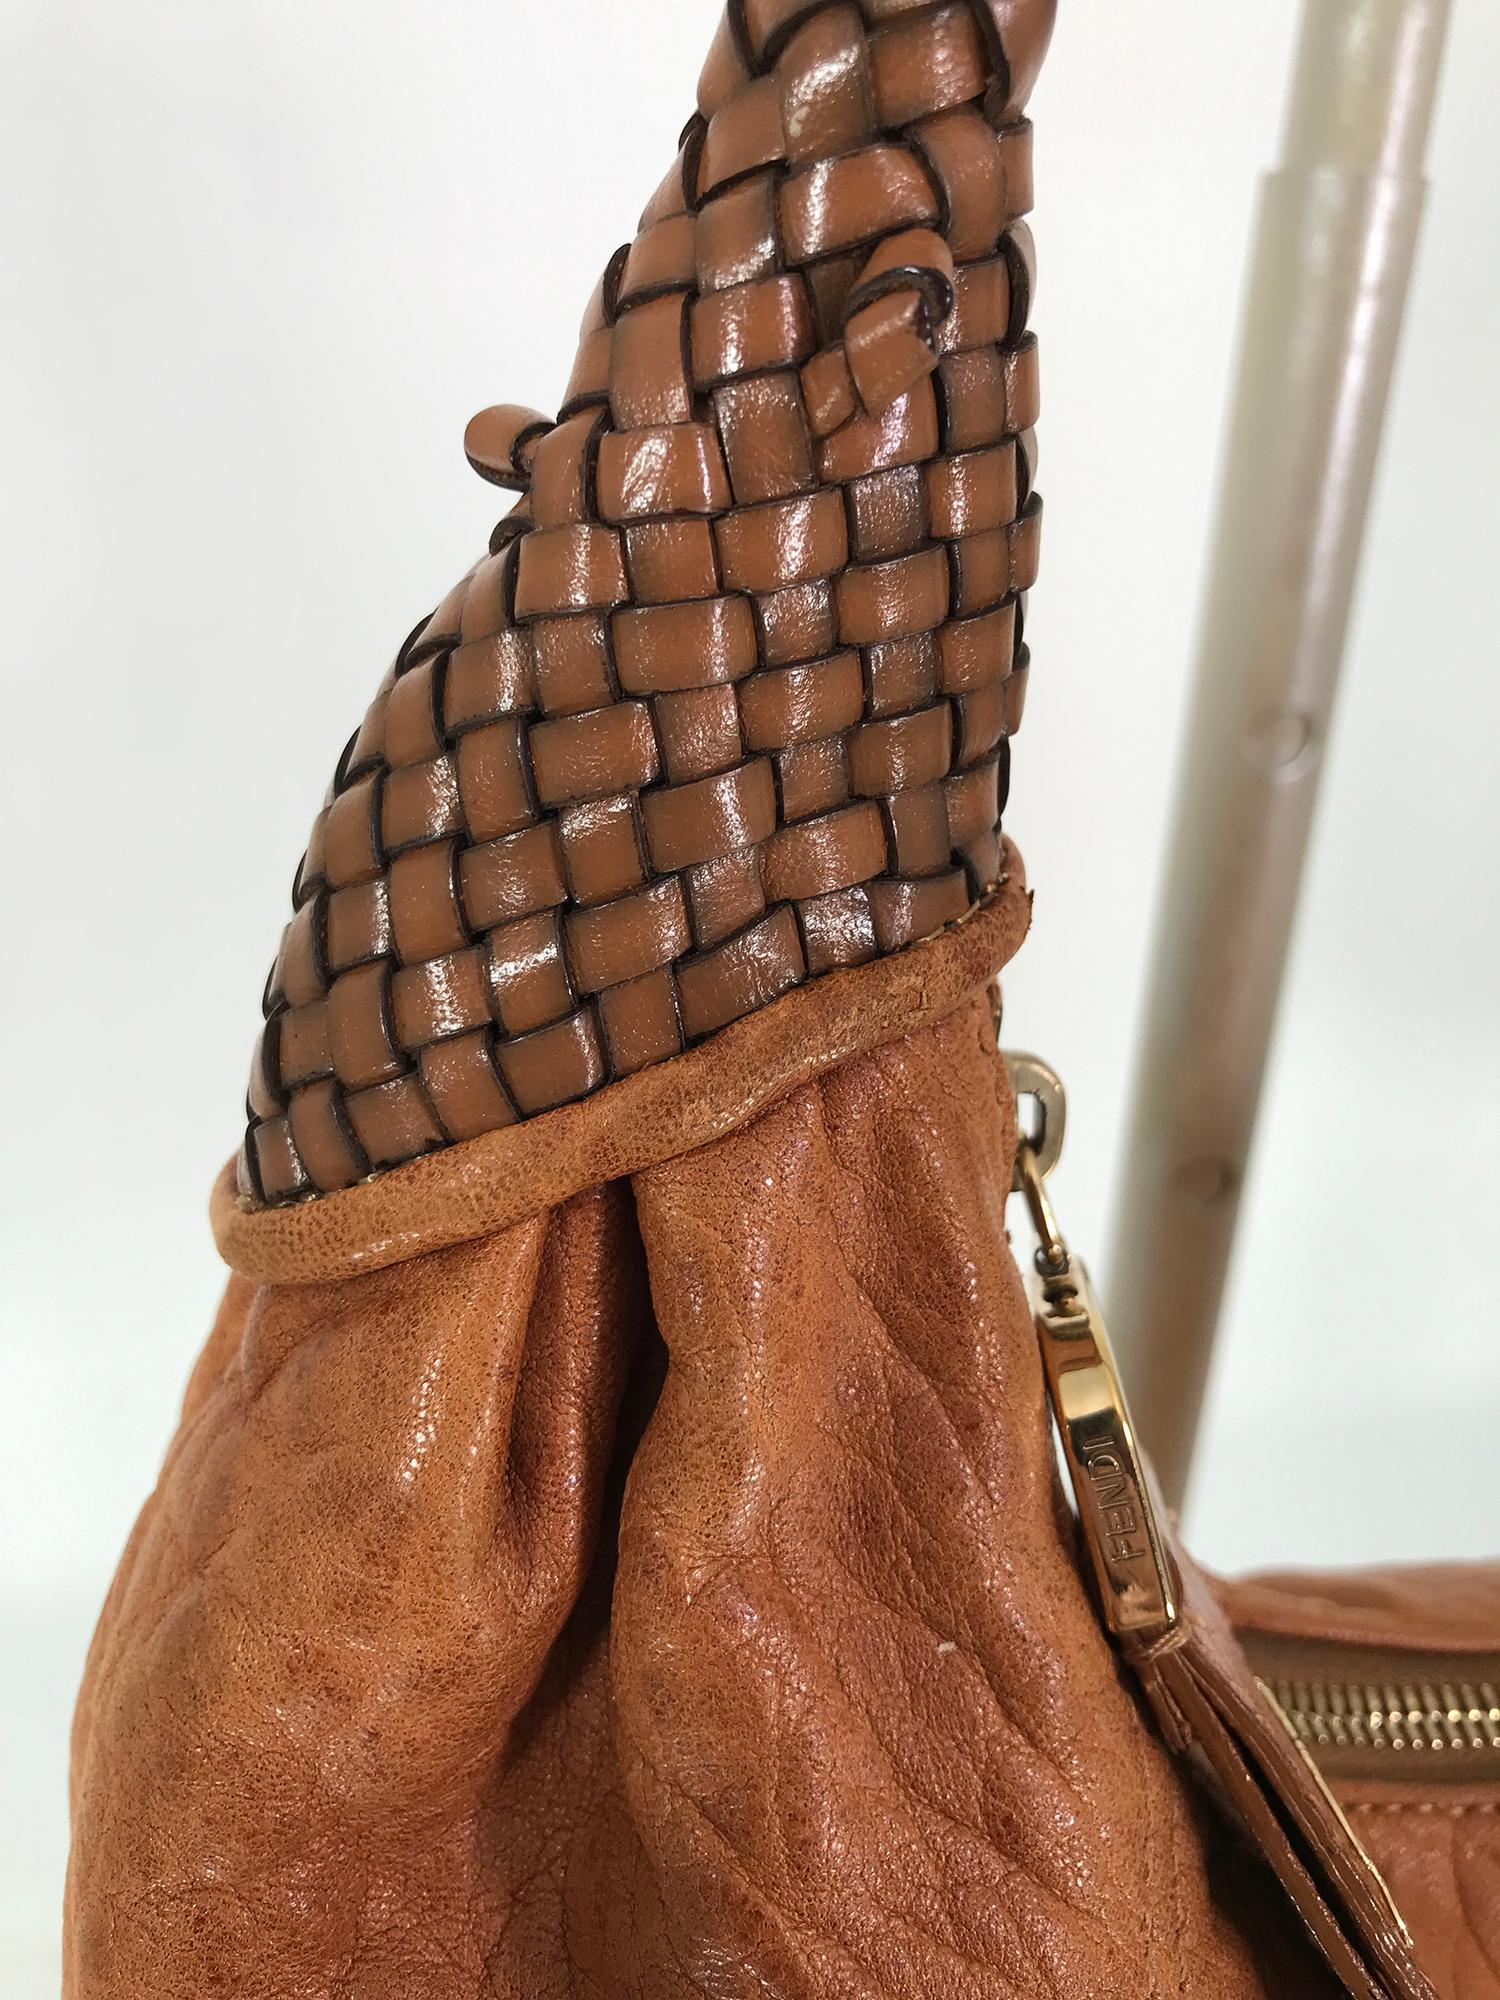 Fendi Spy Boho Shoulder Bag in Caramel Leather Zucca Lining In Good Condition For Sale In West Palm Beach, FL